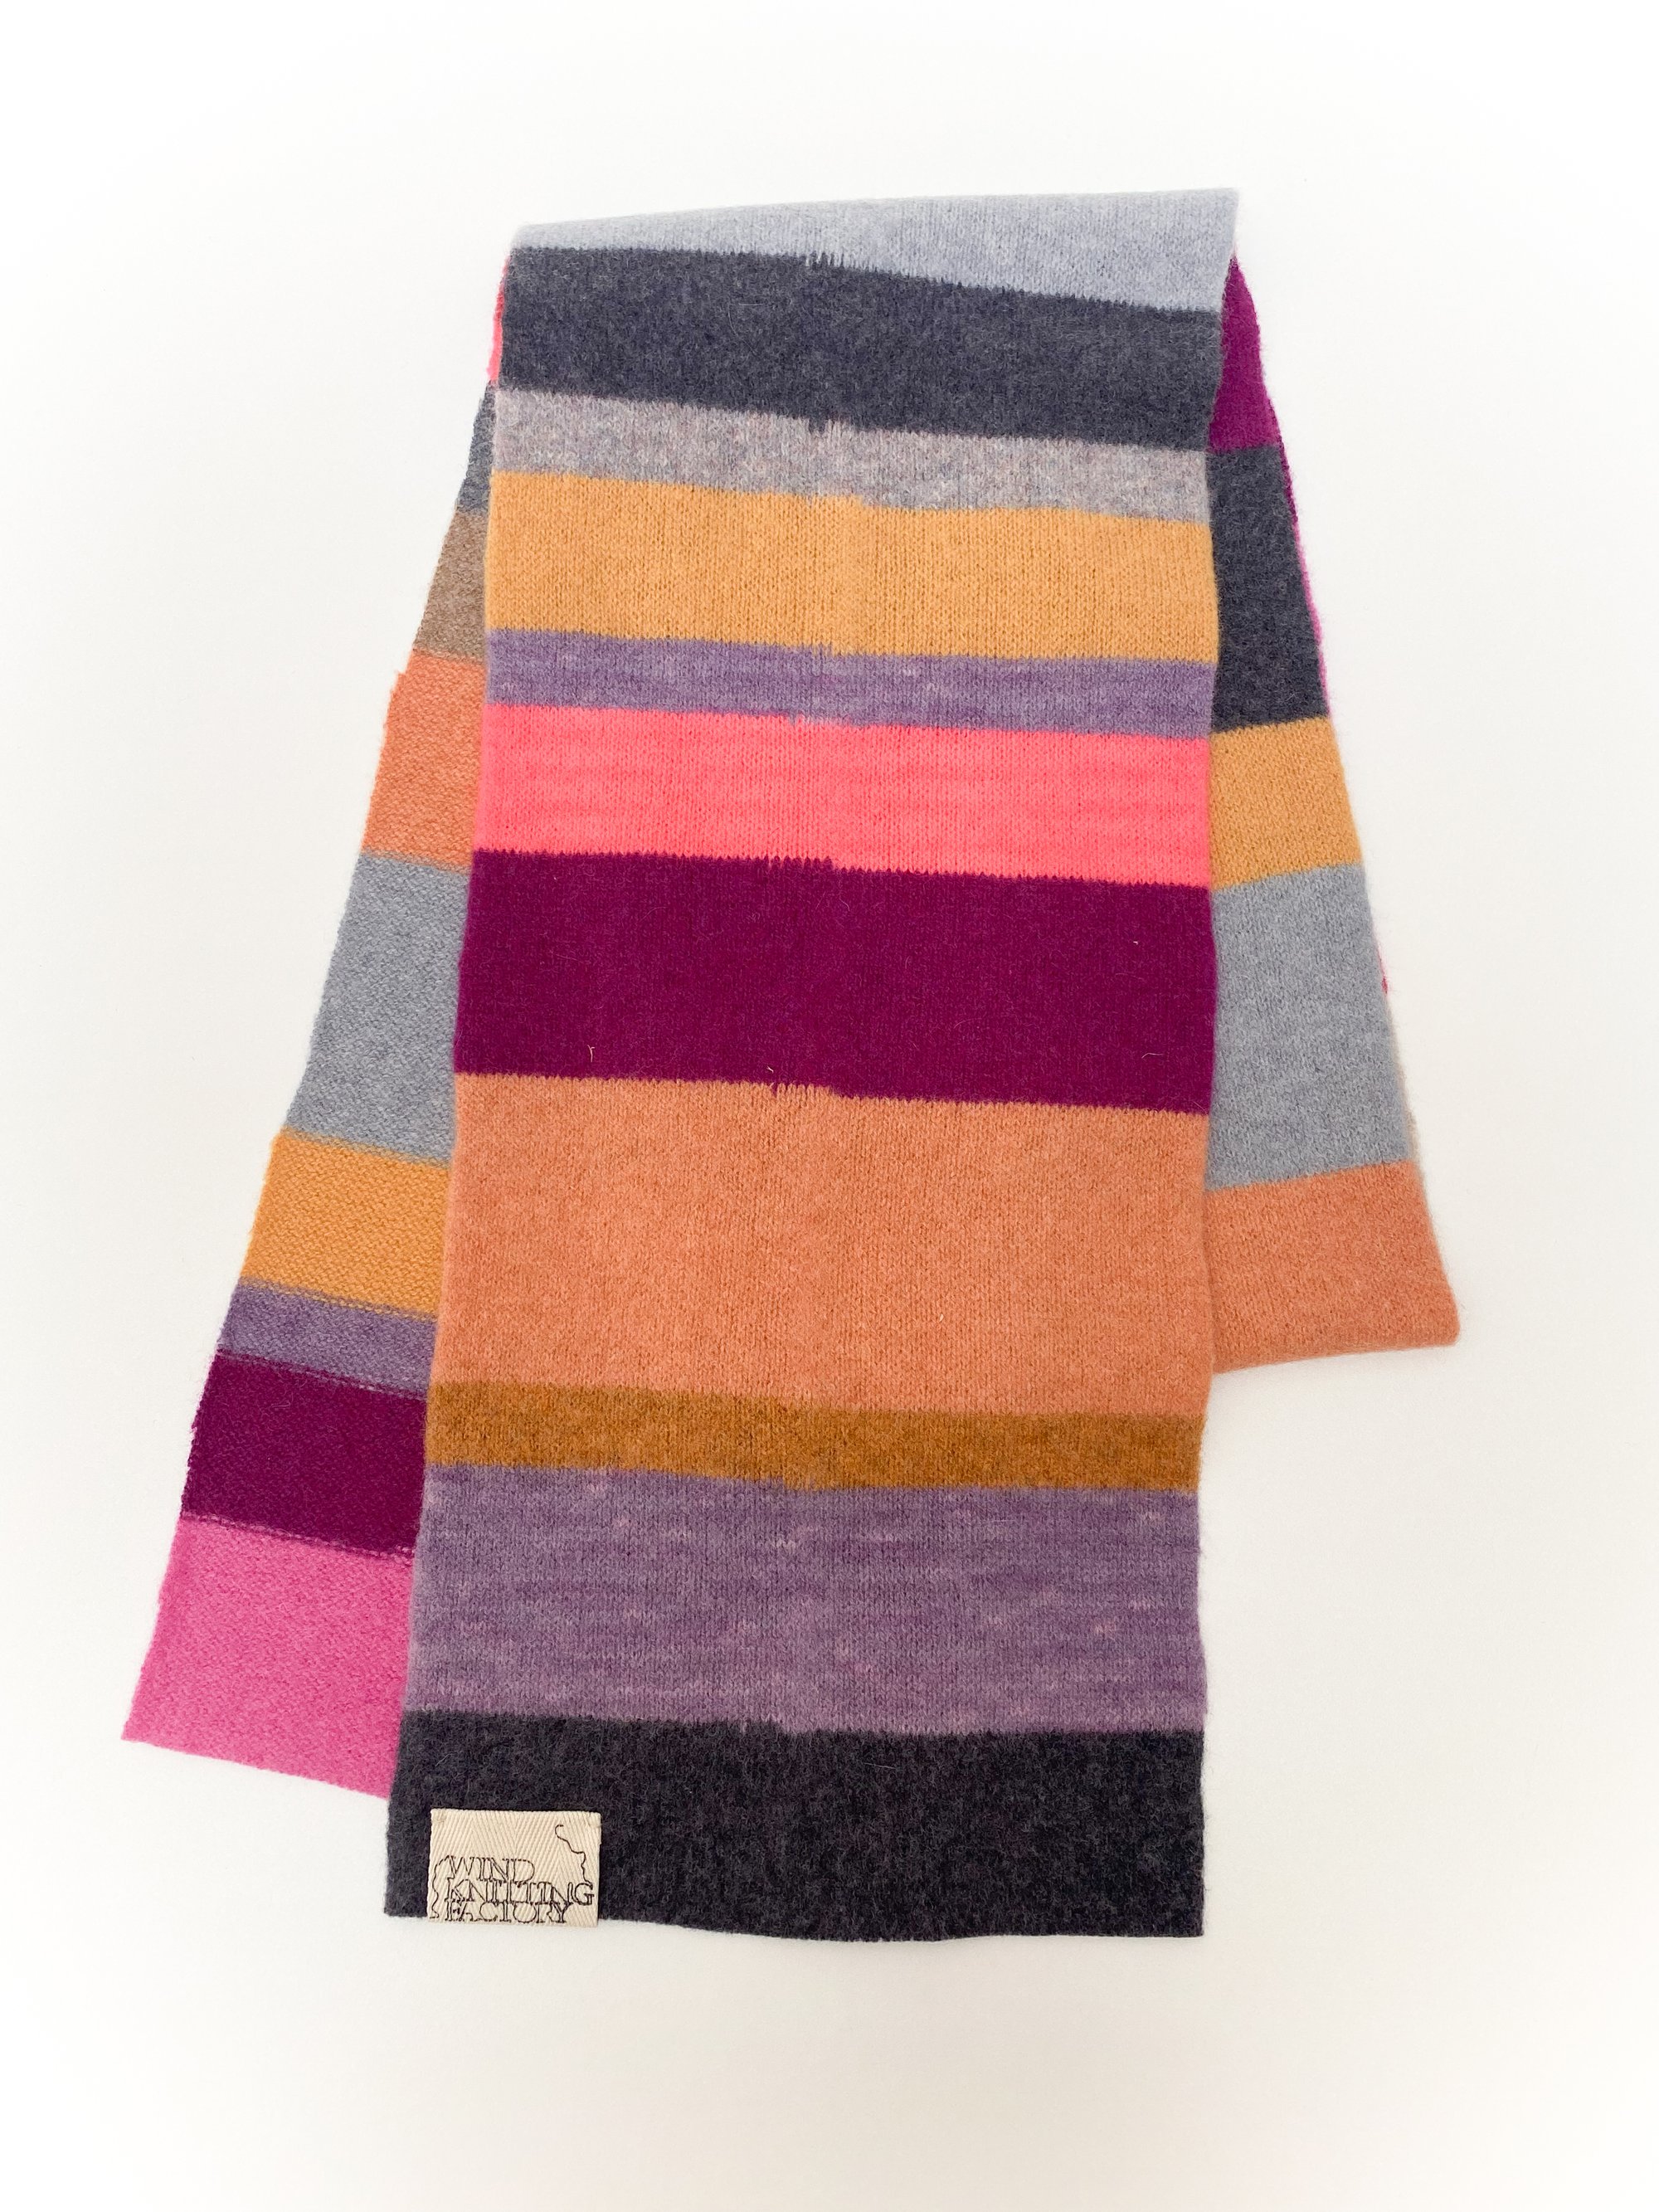 Image of Wind Knitted Scarf orange pink yellow grey purple